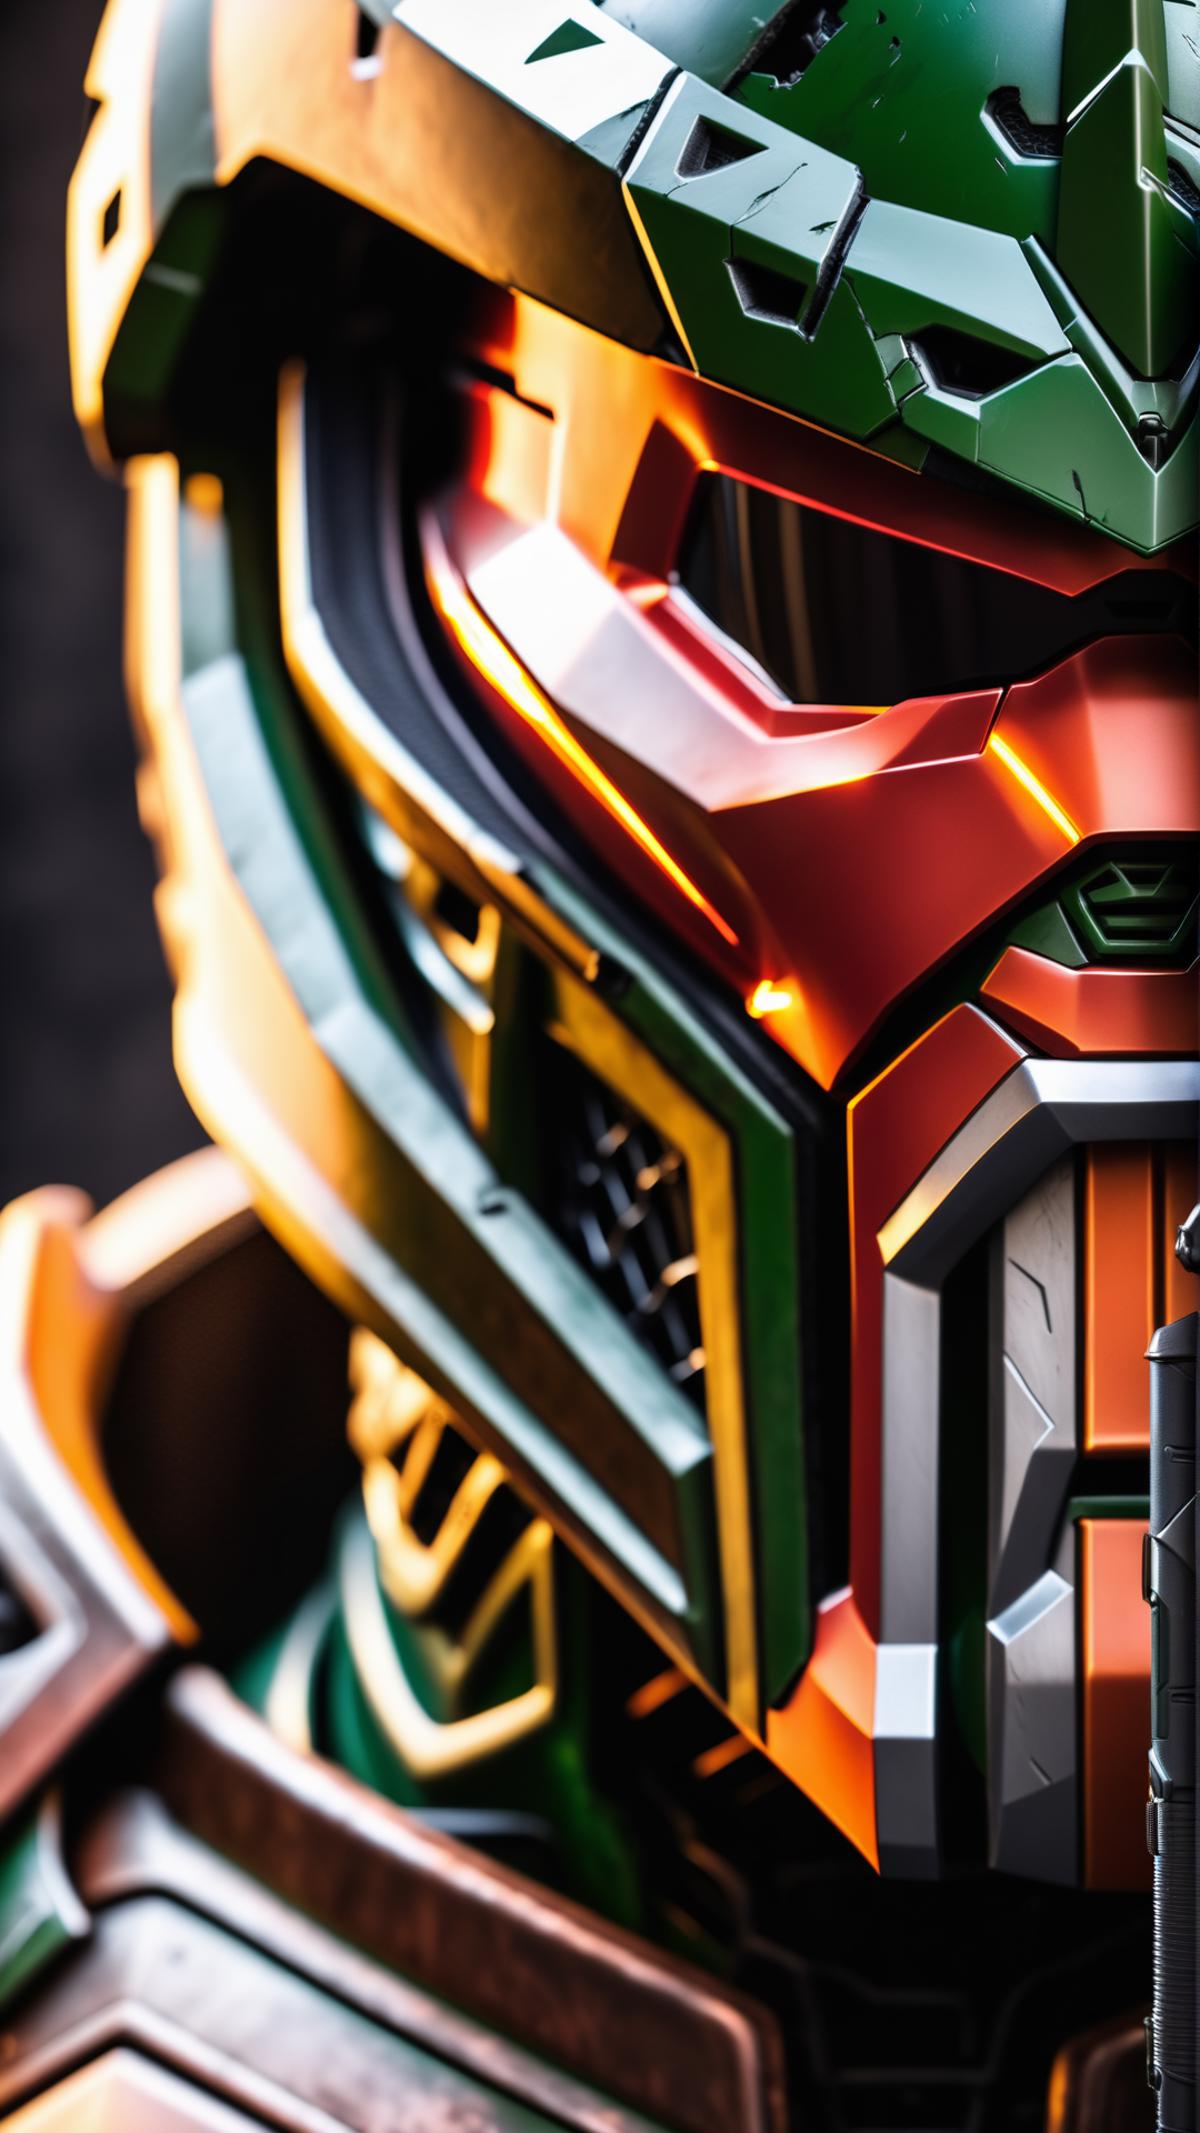 A close-up of a green, red, and black robot head.